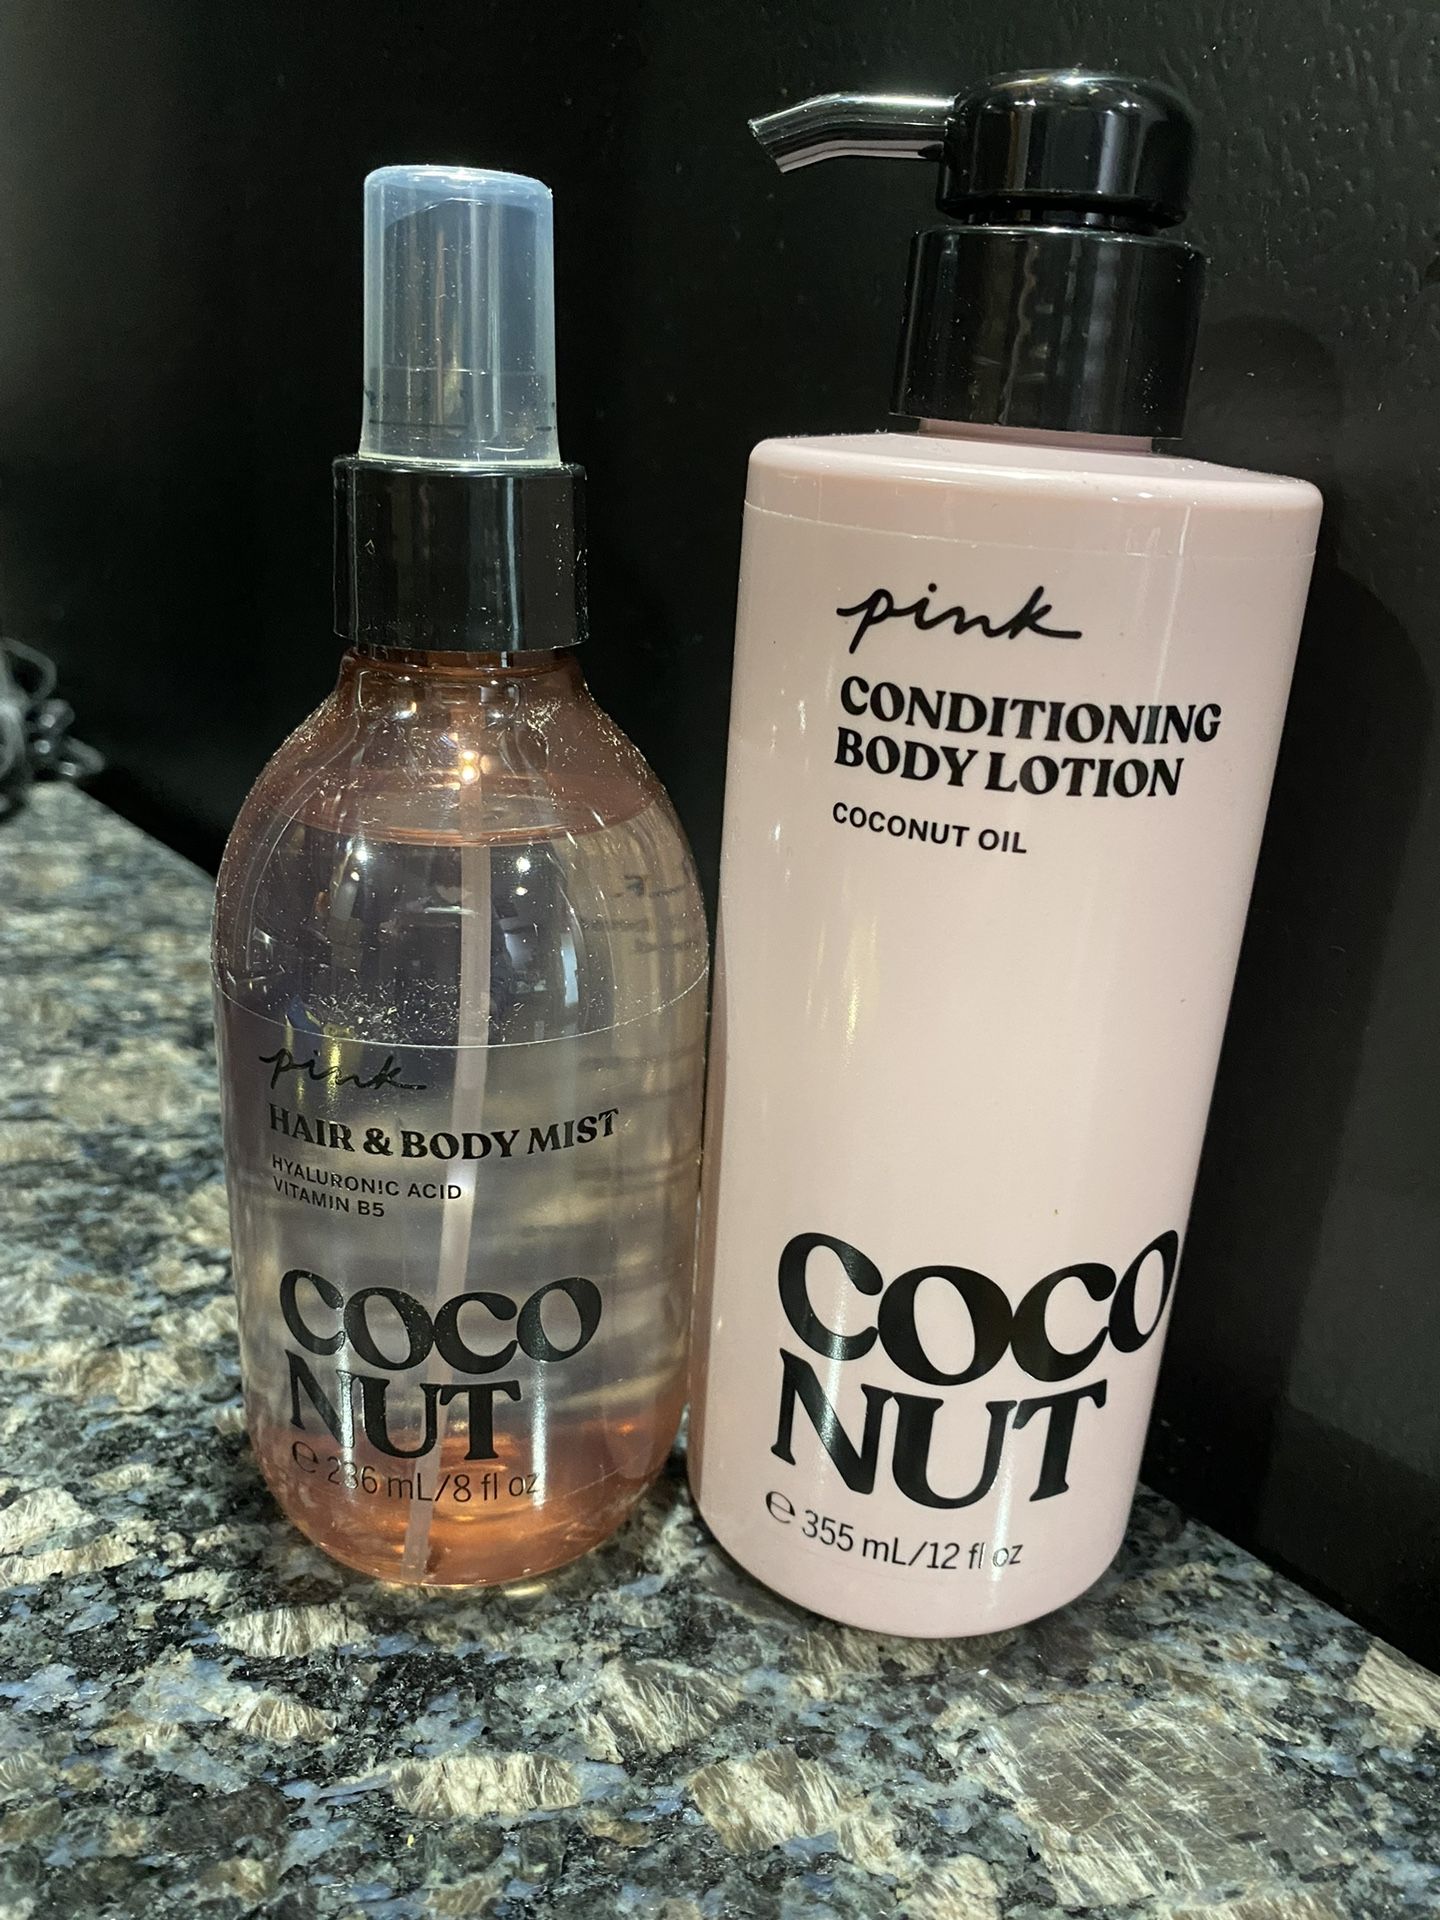 NEW VICTORIAS SECRET PINK COCO FRAGRANCE MIST AND LOTION SET $20!